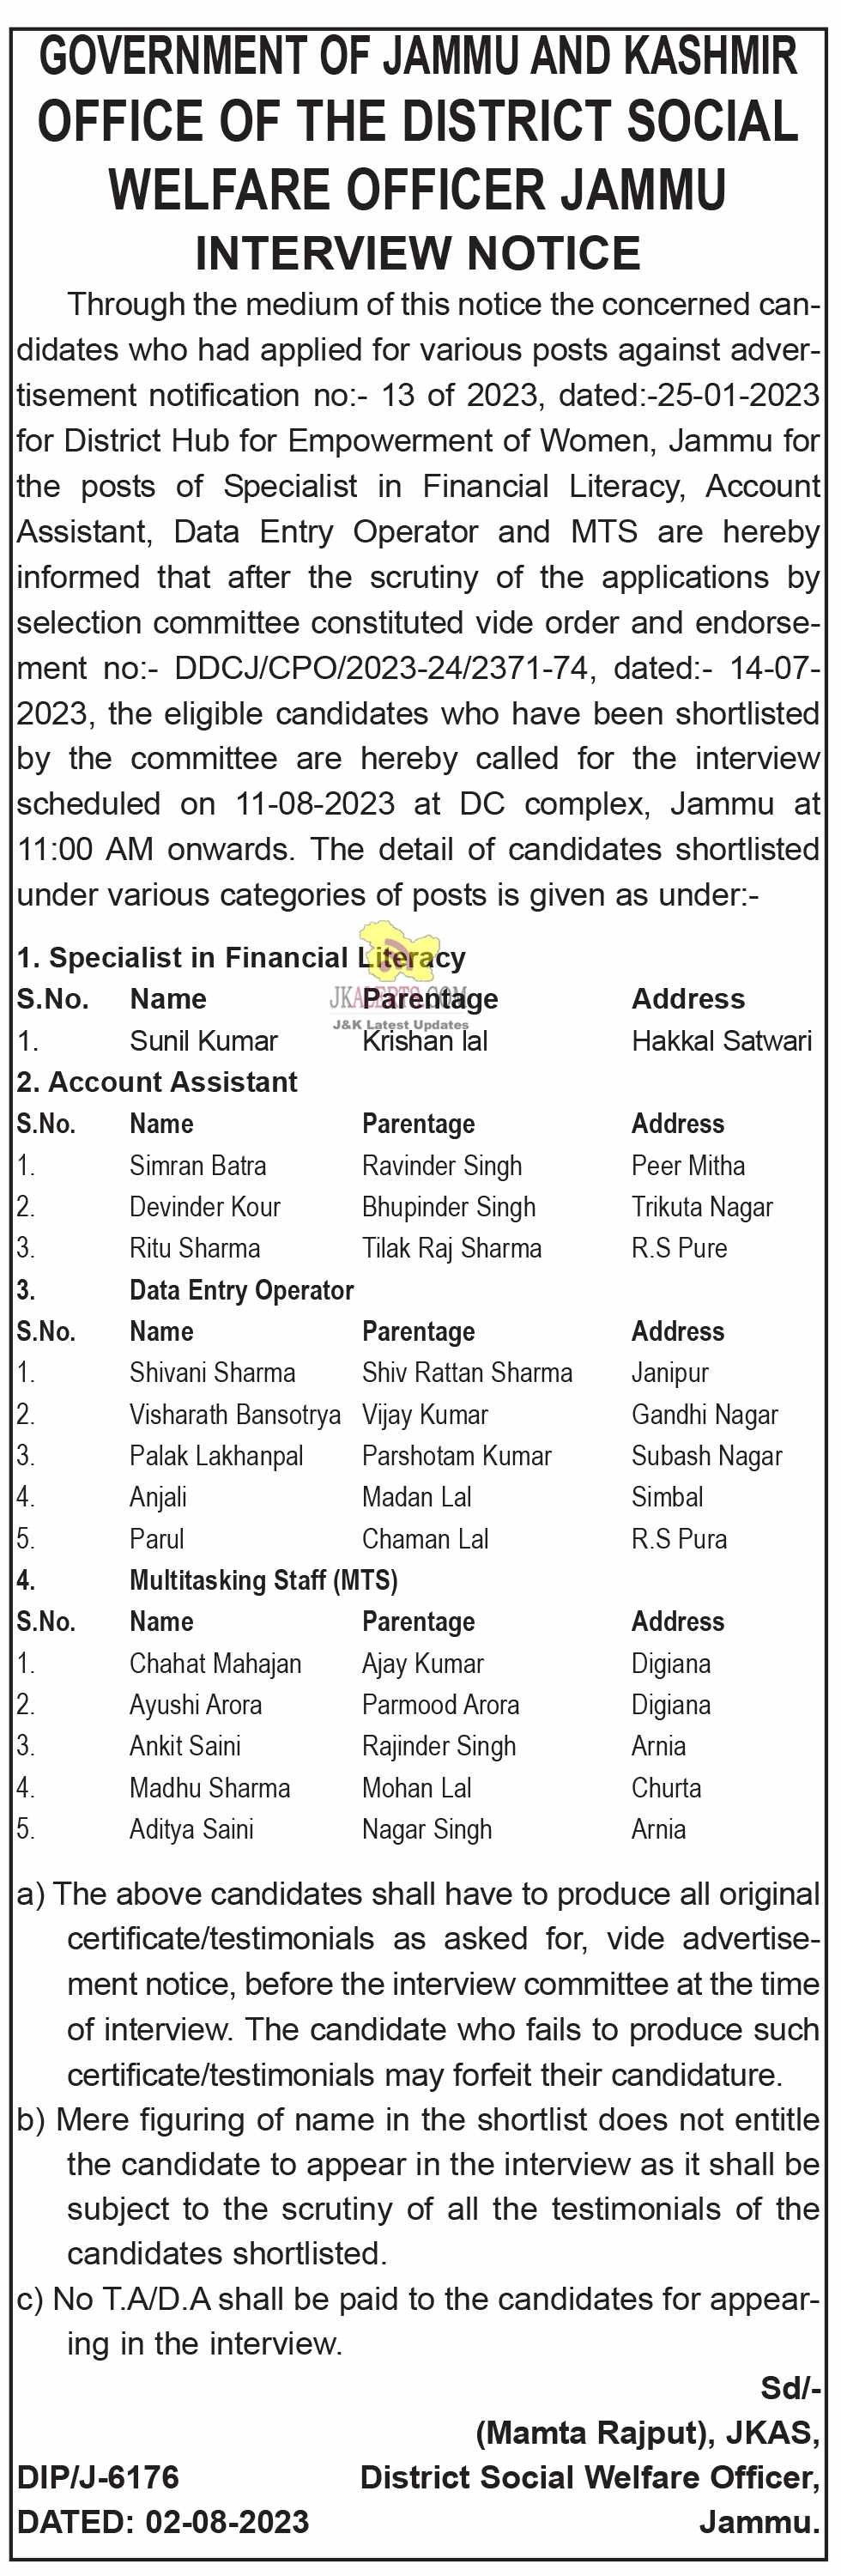 Interview Notice for the Various Post DHEW, Jammu.